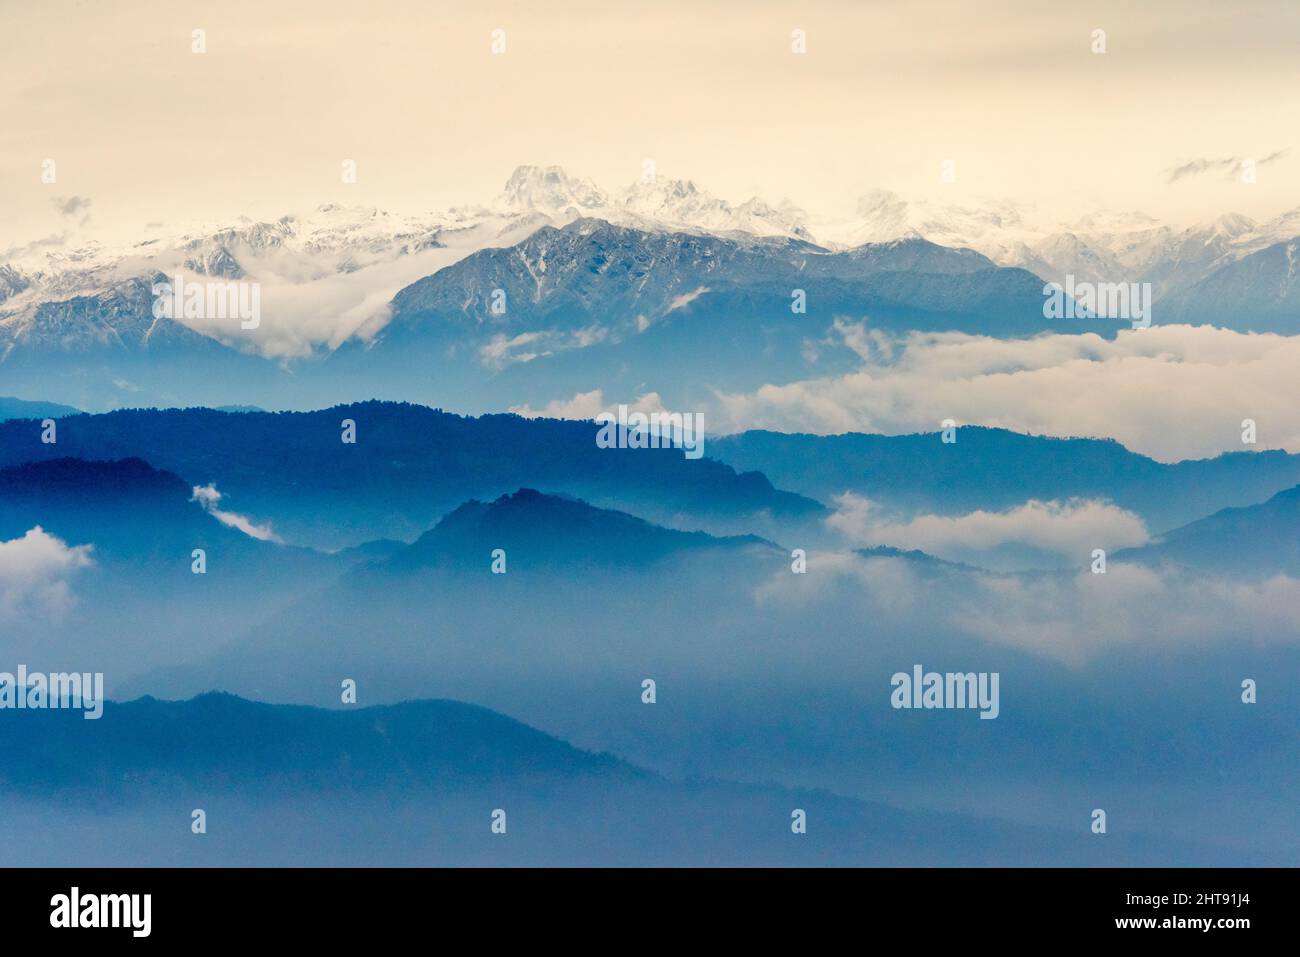 Landscape of the Himalayas in morning mist, Darjeeling District, West Bengal, India Stock Photo